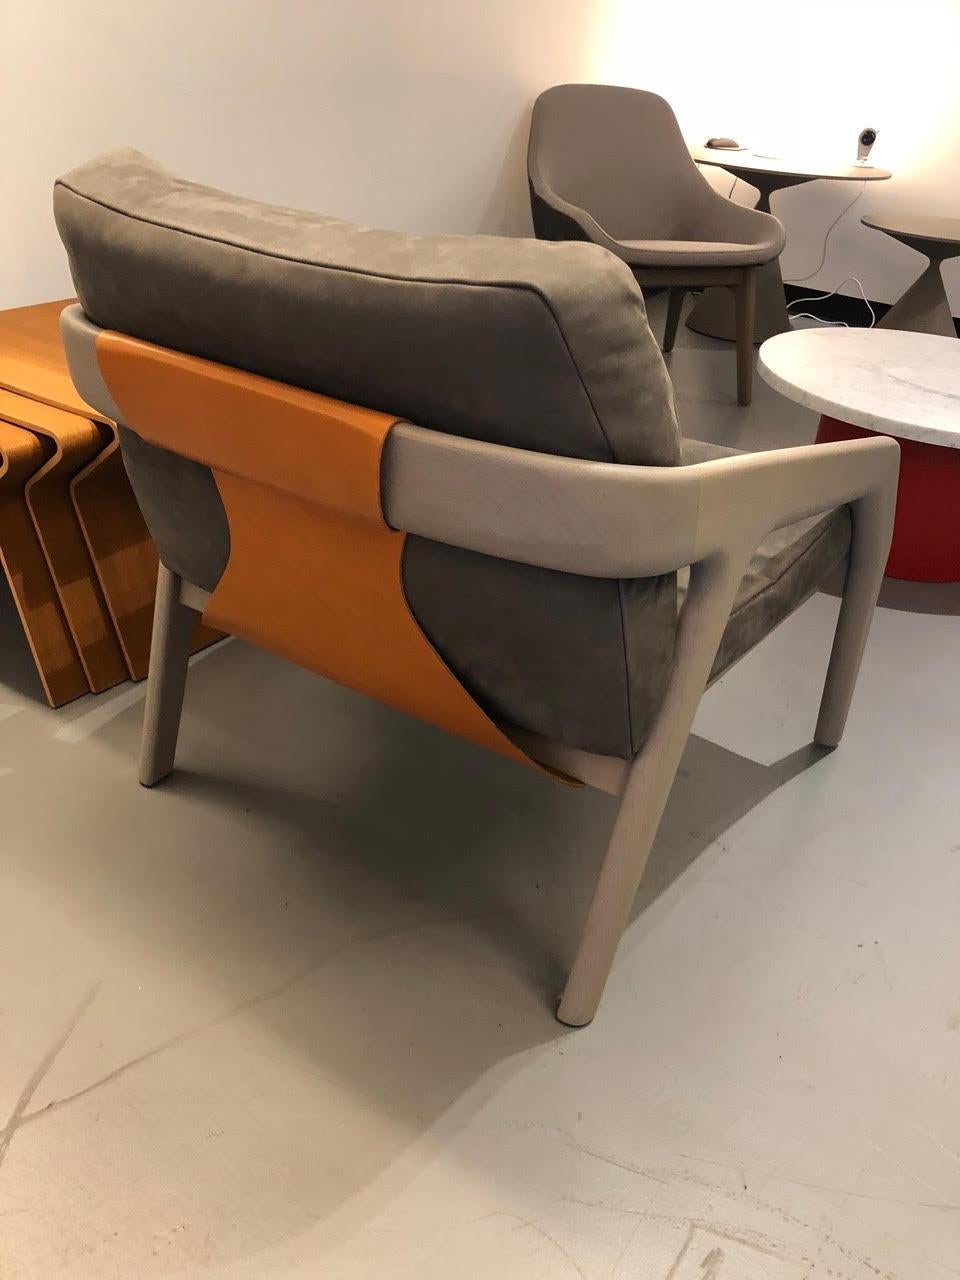 Zeitraum Friday 1 lounge armchair
Frame: Cold grey
Seat/back: Melano 1489 Steingrau
Saddle leather: Natural
Original price: $5724
It is Friday evening and you can make yourself comfortable on the sofa, maybe enjoy a drink. The subtly formed